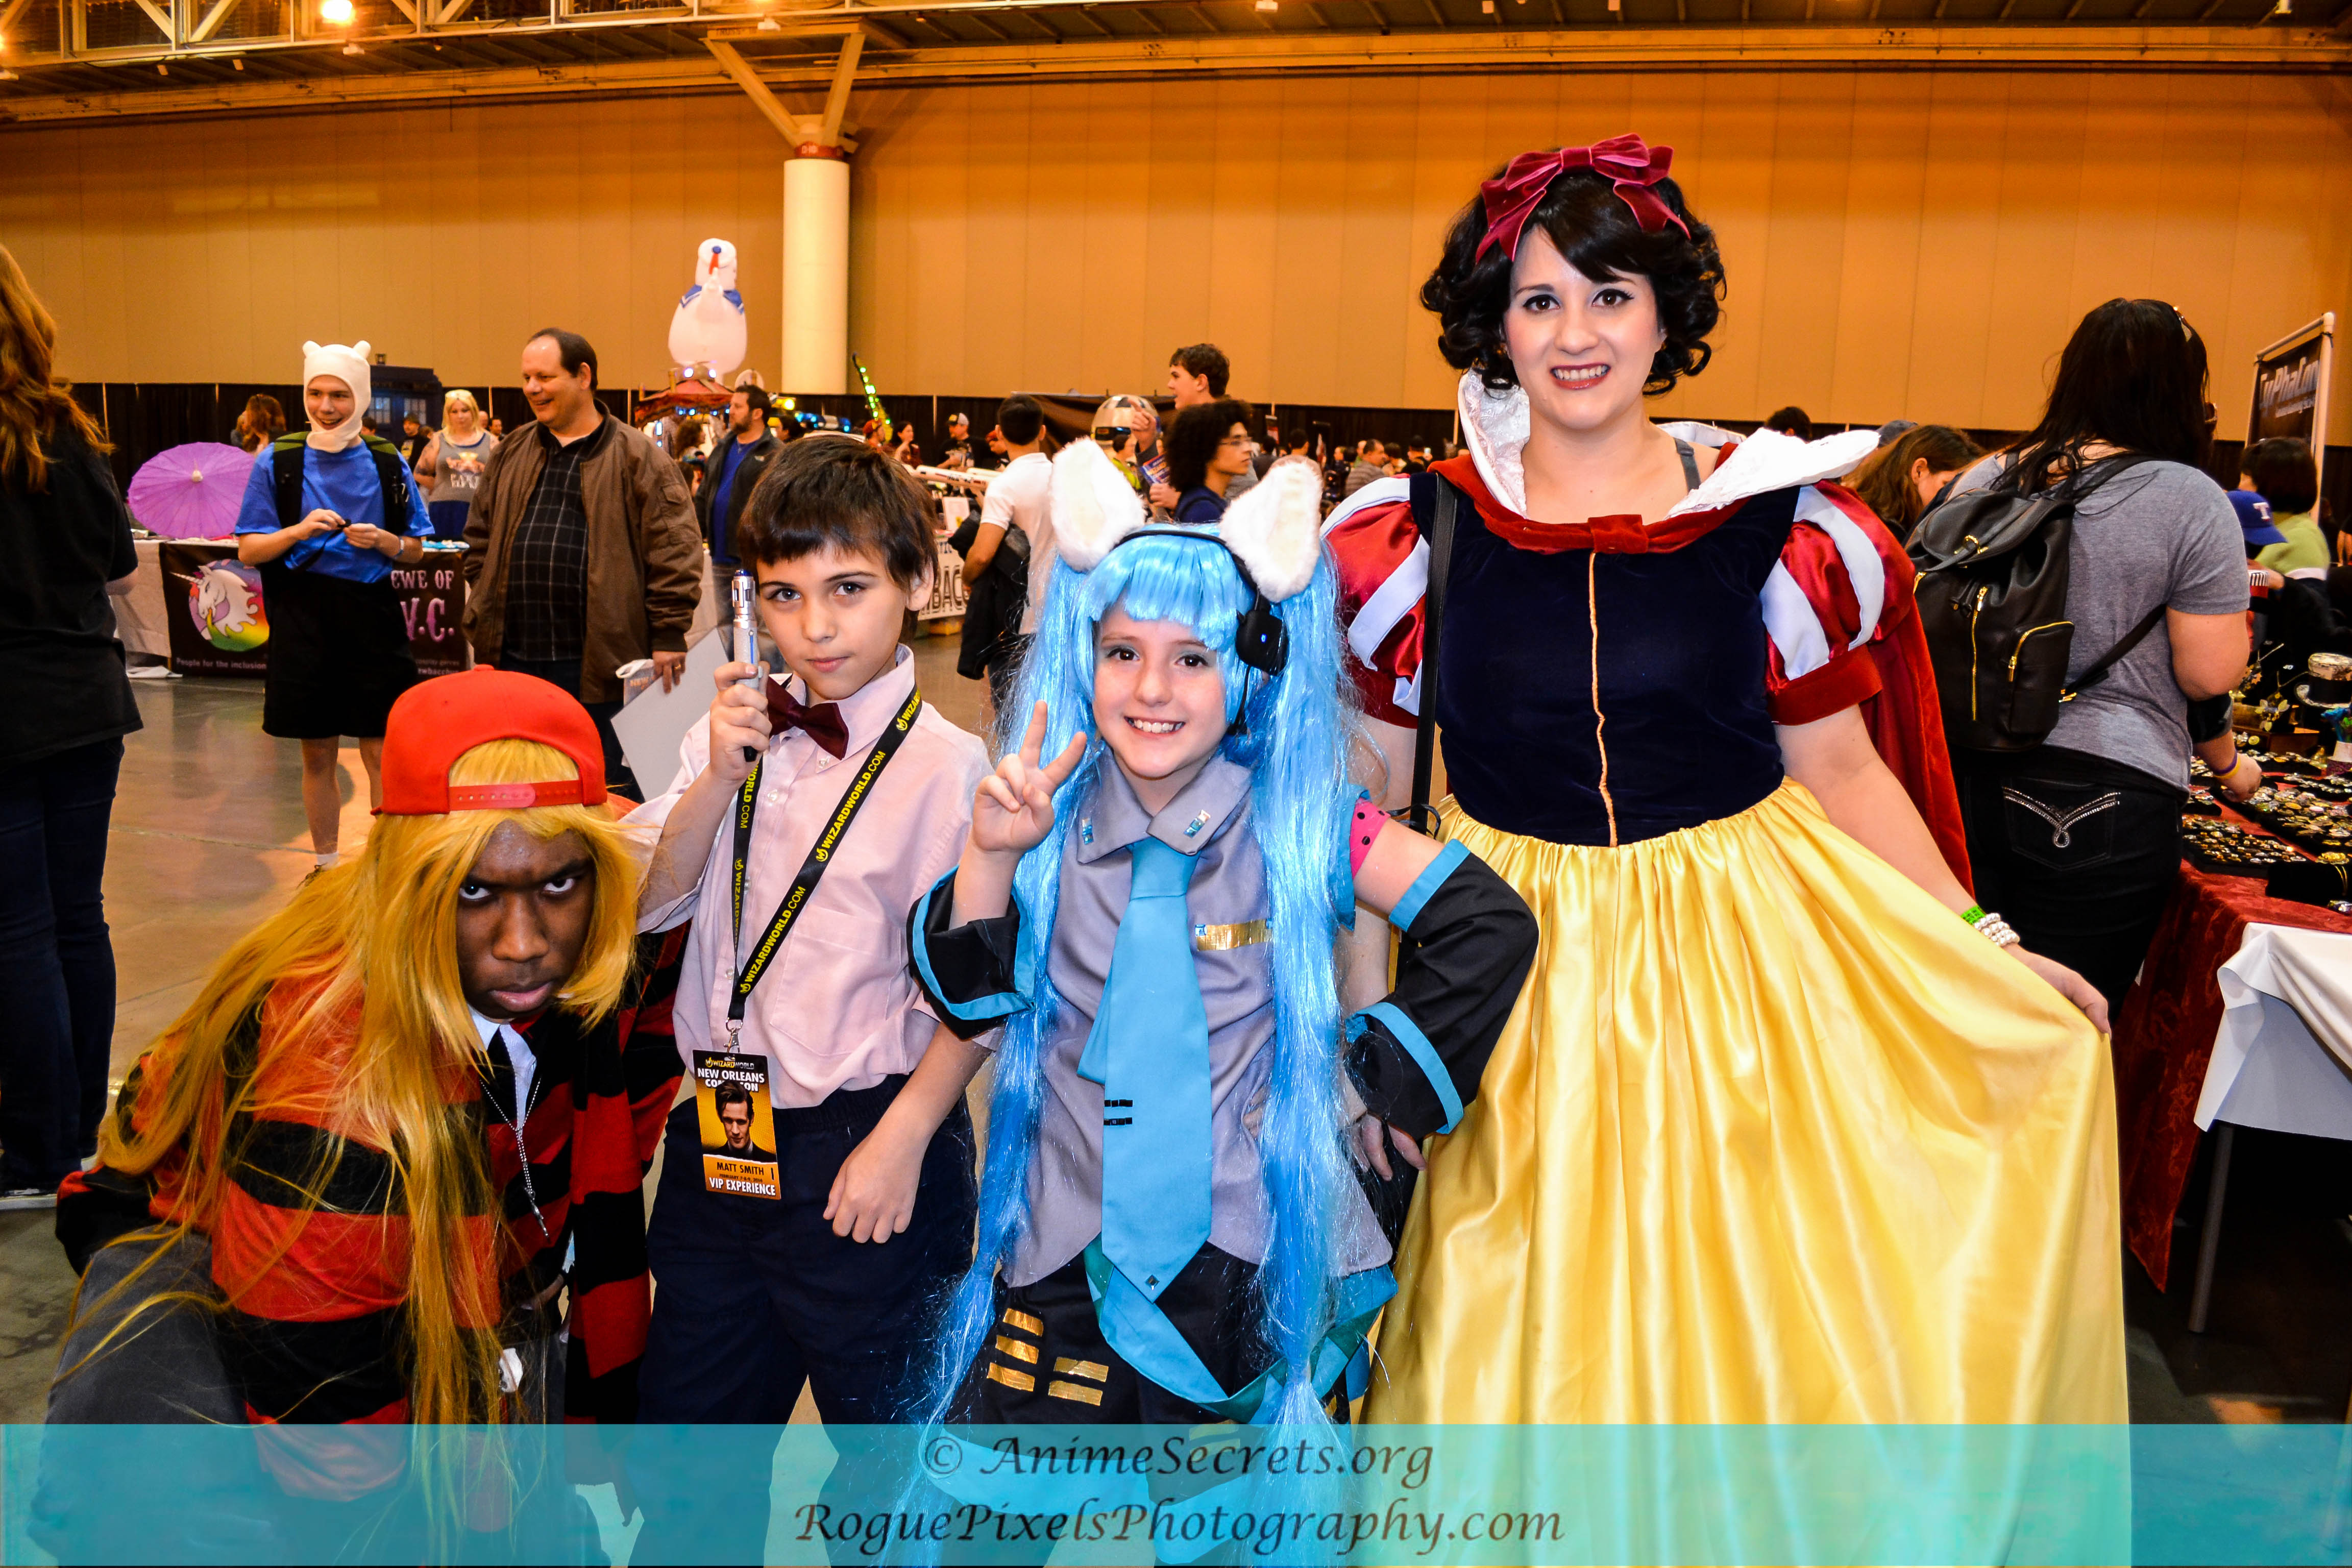 At NakaKon 2023 Resilience was more than just a theme